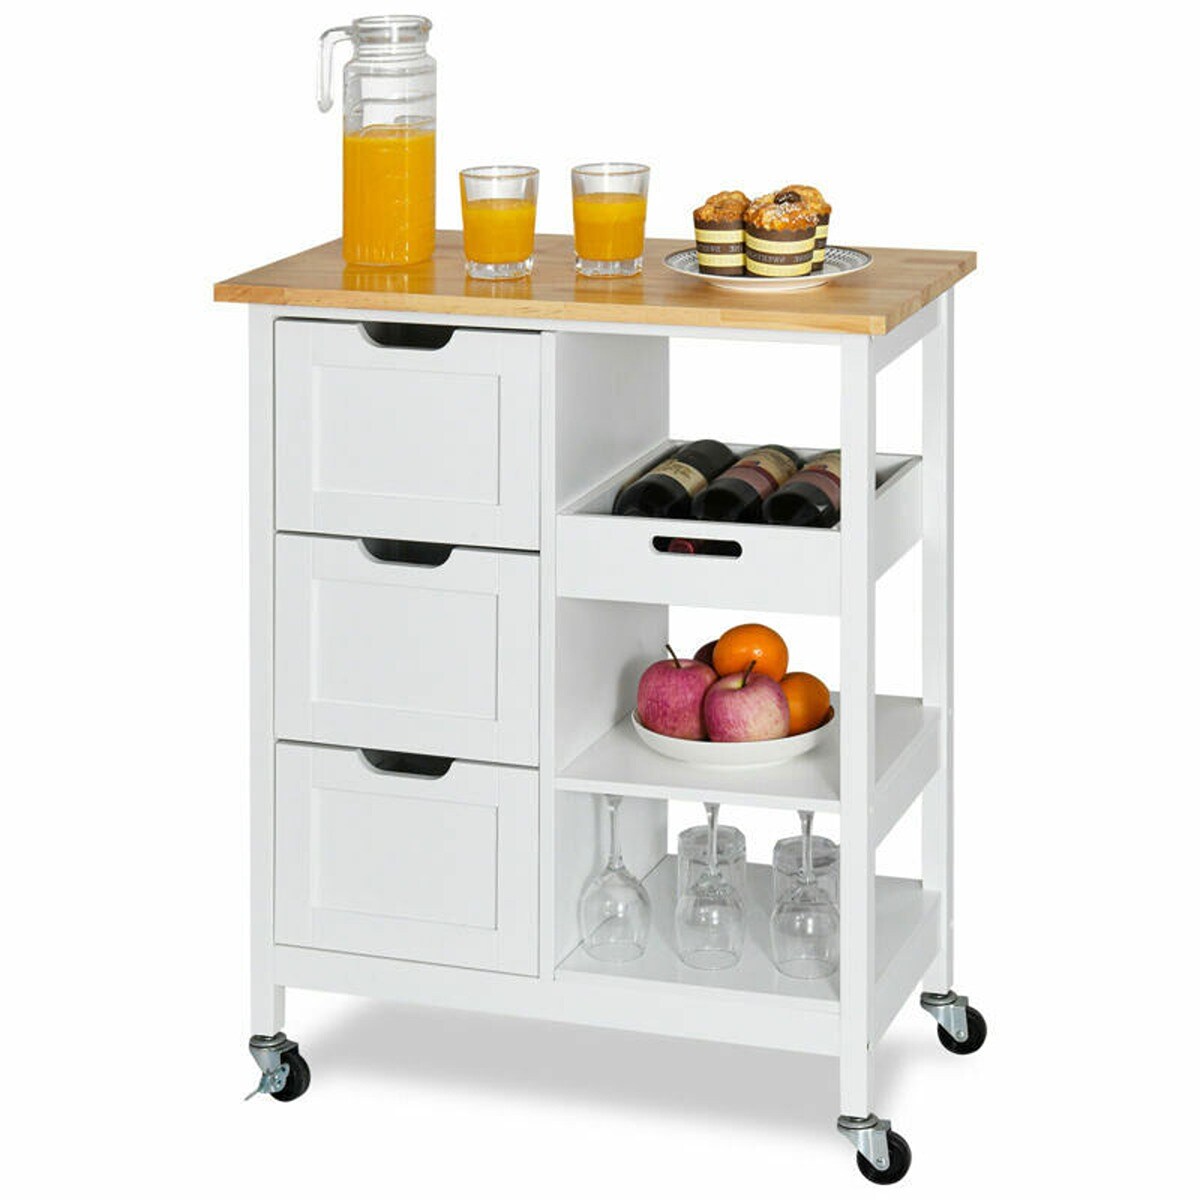 3 Tier Durable Trolley Cart Wood Storage Drawers with Wheels